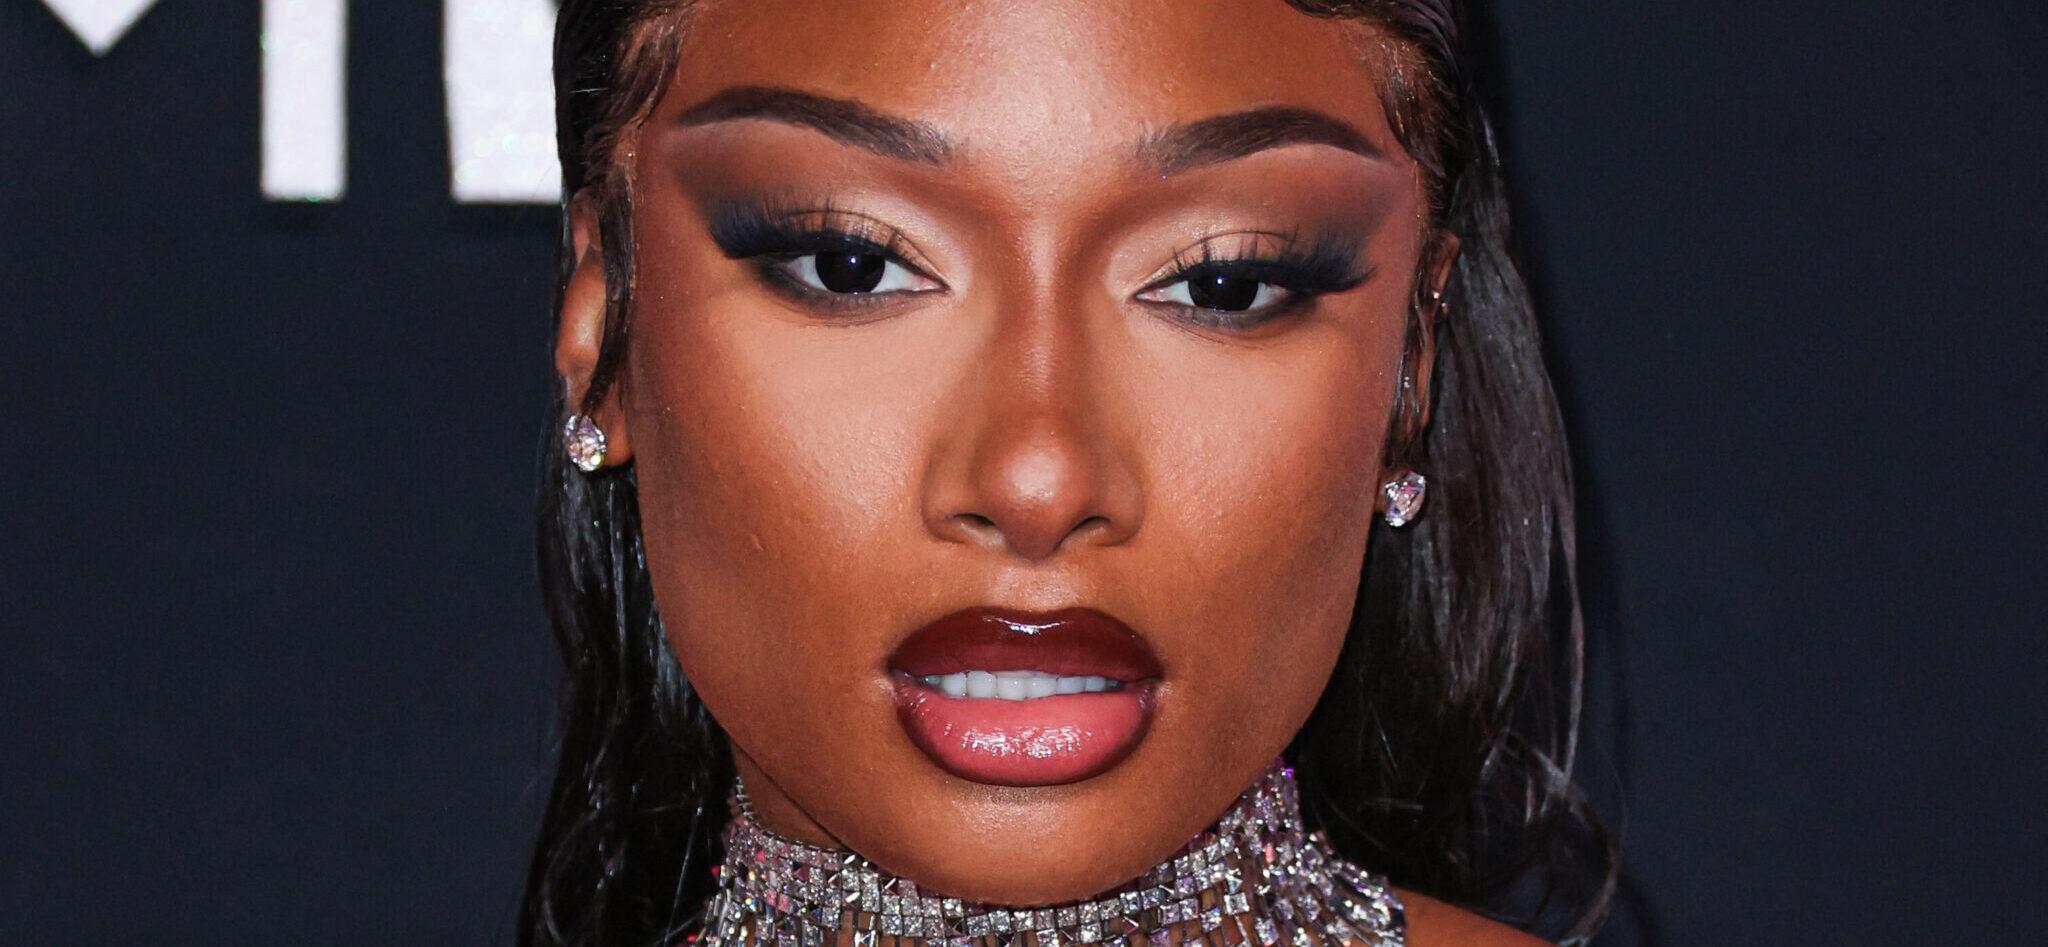 Megan Thee Stallion's Cameraman Claims He Was Forced To Watch Her Have Sex